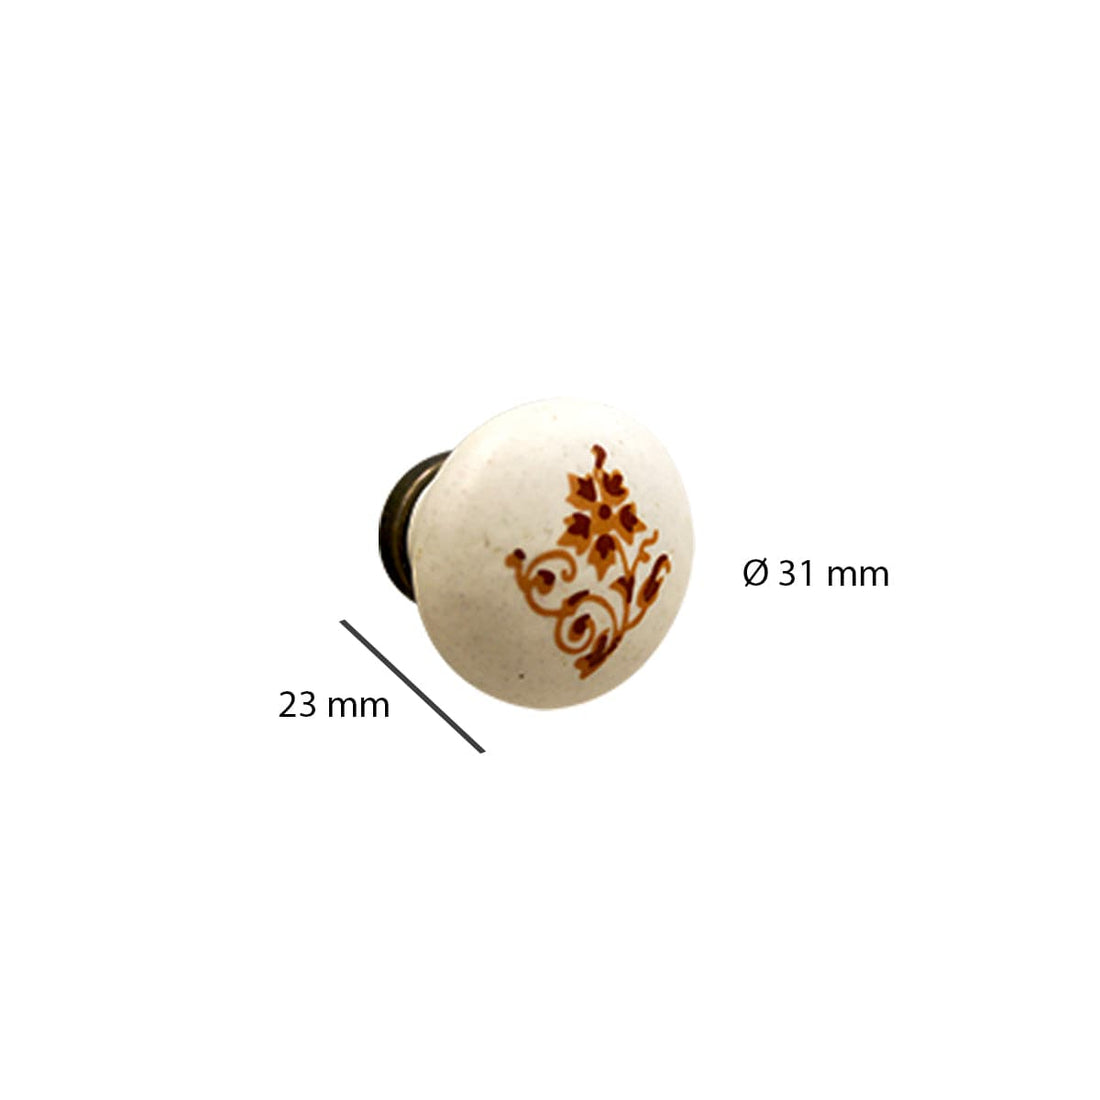 2 WHITE CERAMIC KNOBS D 31MM WITH DECORATION